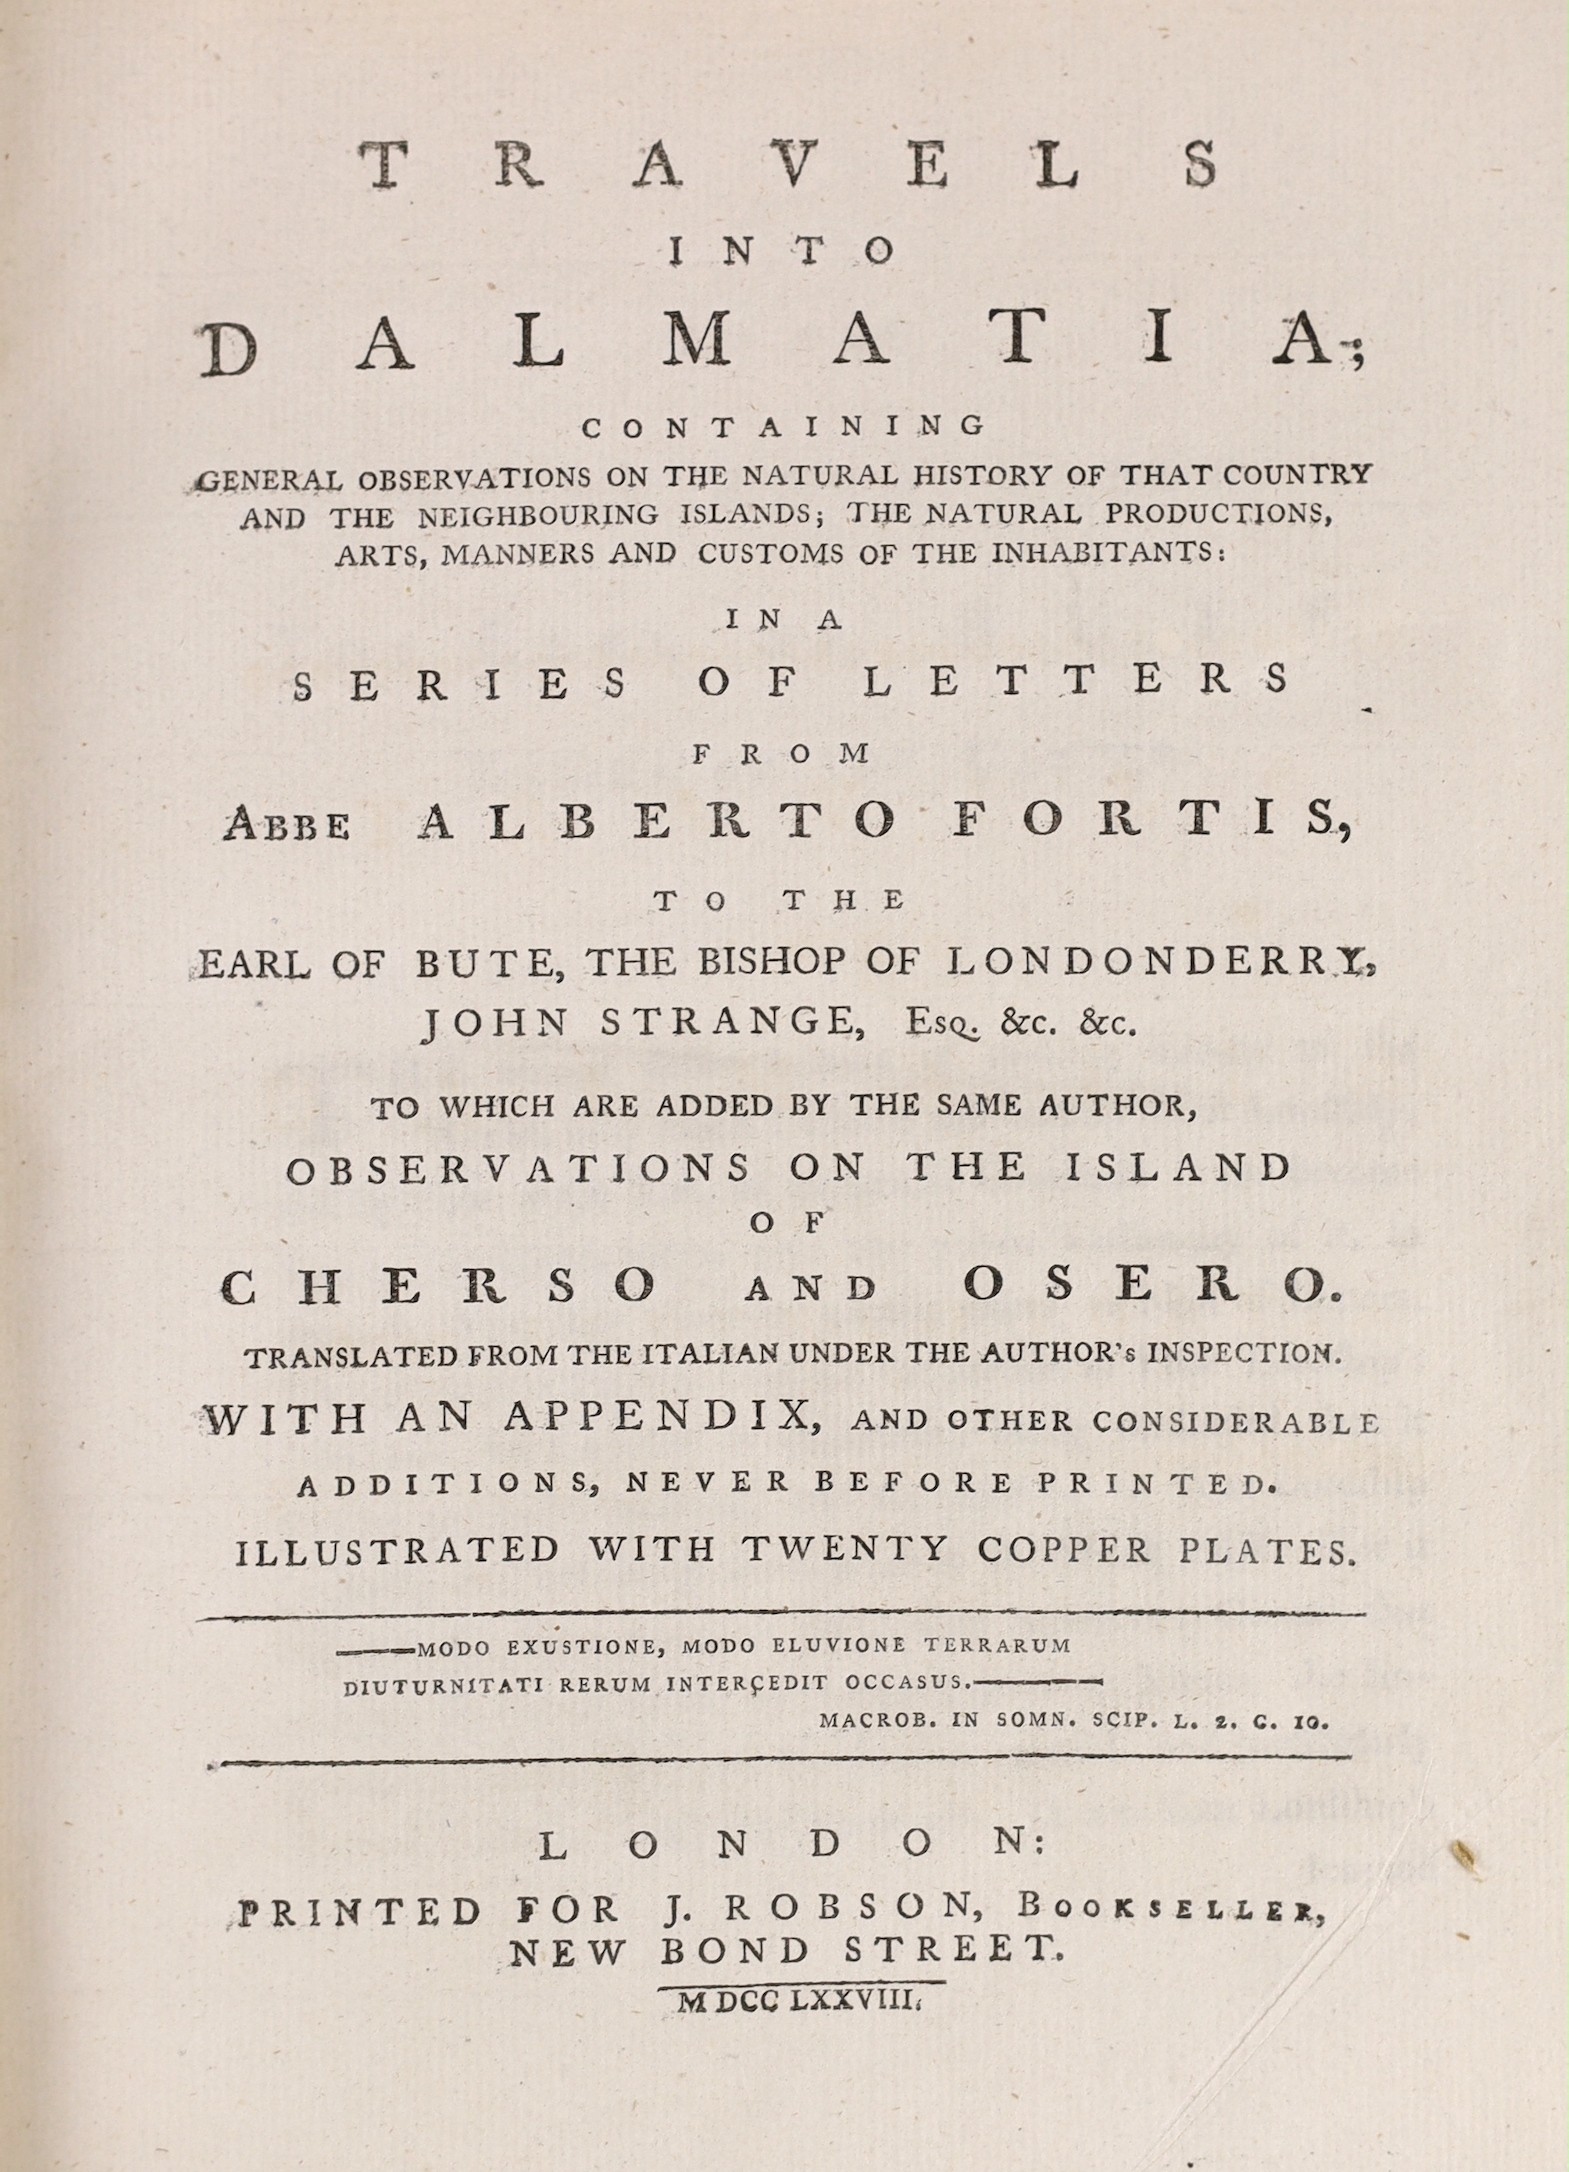 Fortis, Abbe Alberto - Travels into Dalmatia....to which are added.....Observations on the Island of Cherso and Osero.....with an Appendix....2 folded maps, a folded plan and 16 engraved plates (mostly faded), 2 text eng